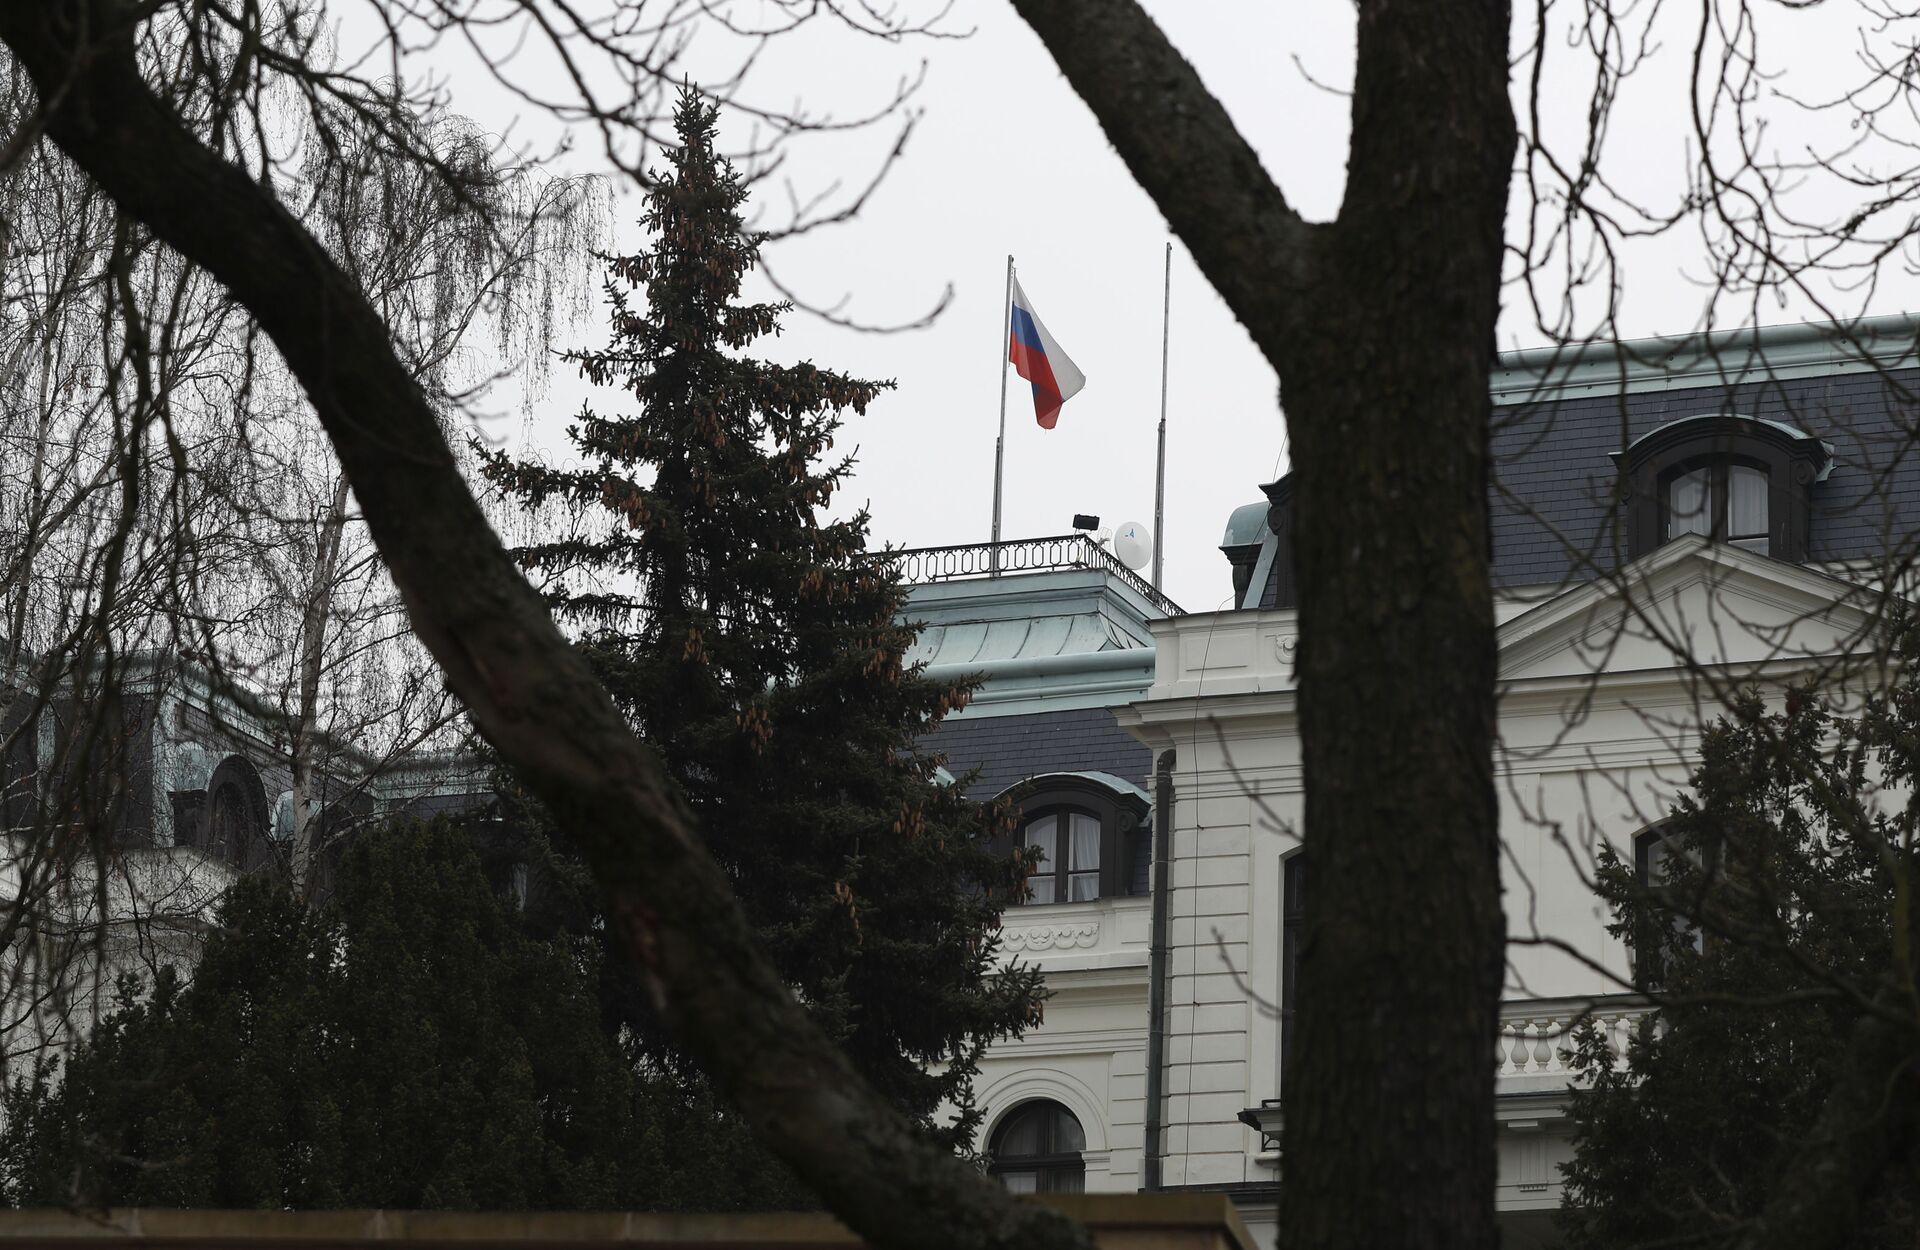 Slovakia Expels Three Employees of Russian Embassy in Solidarity With Czech Republic - Sputnik International, 1920, 22.04.2021